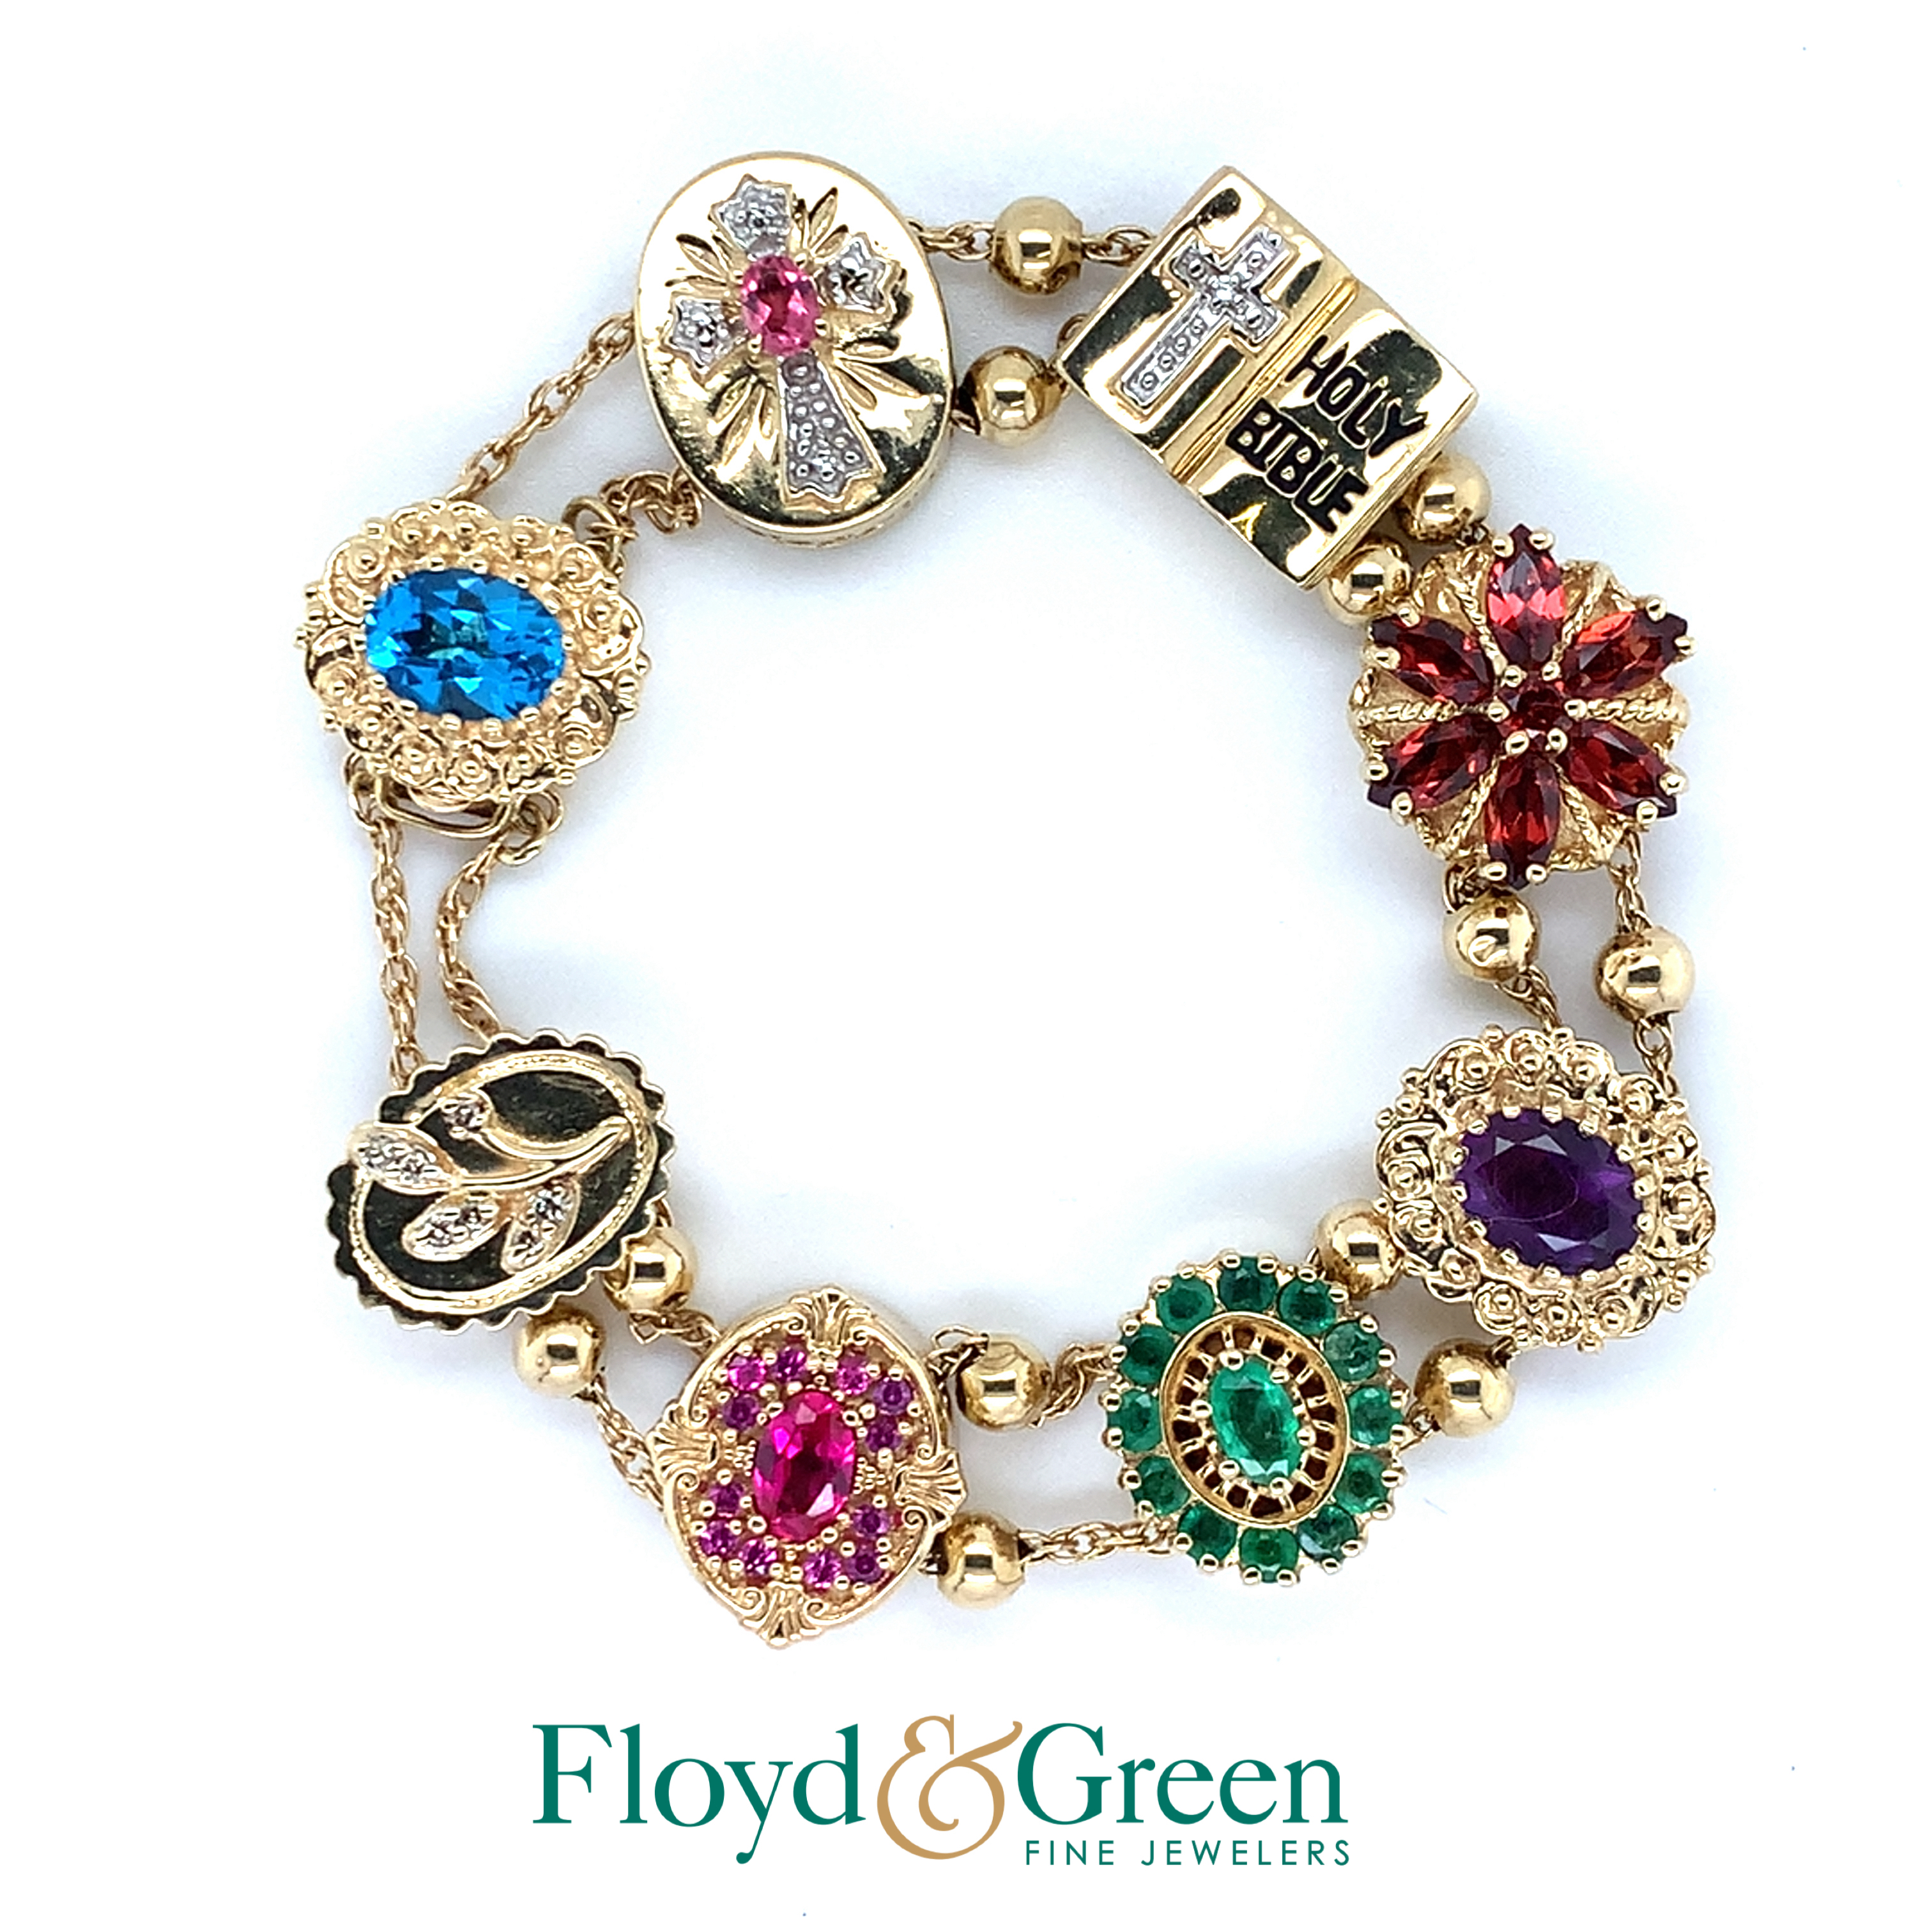 10K Two-Tone Link Bracelet with 8 Slides of Various Stones